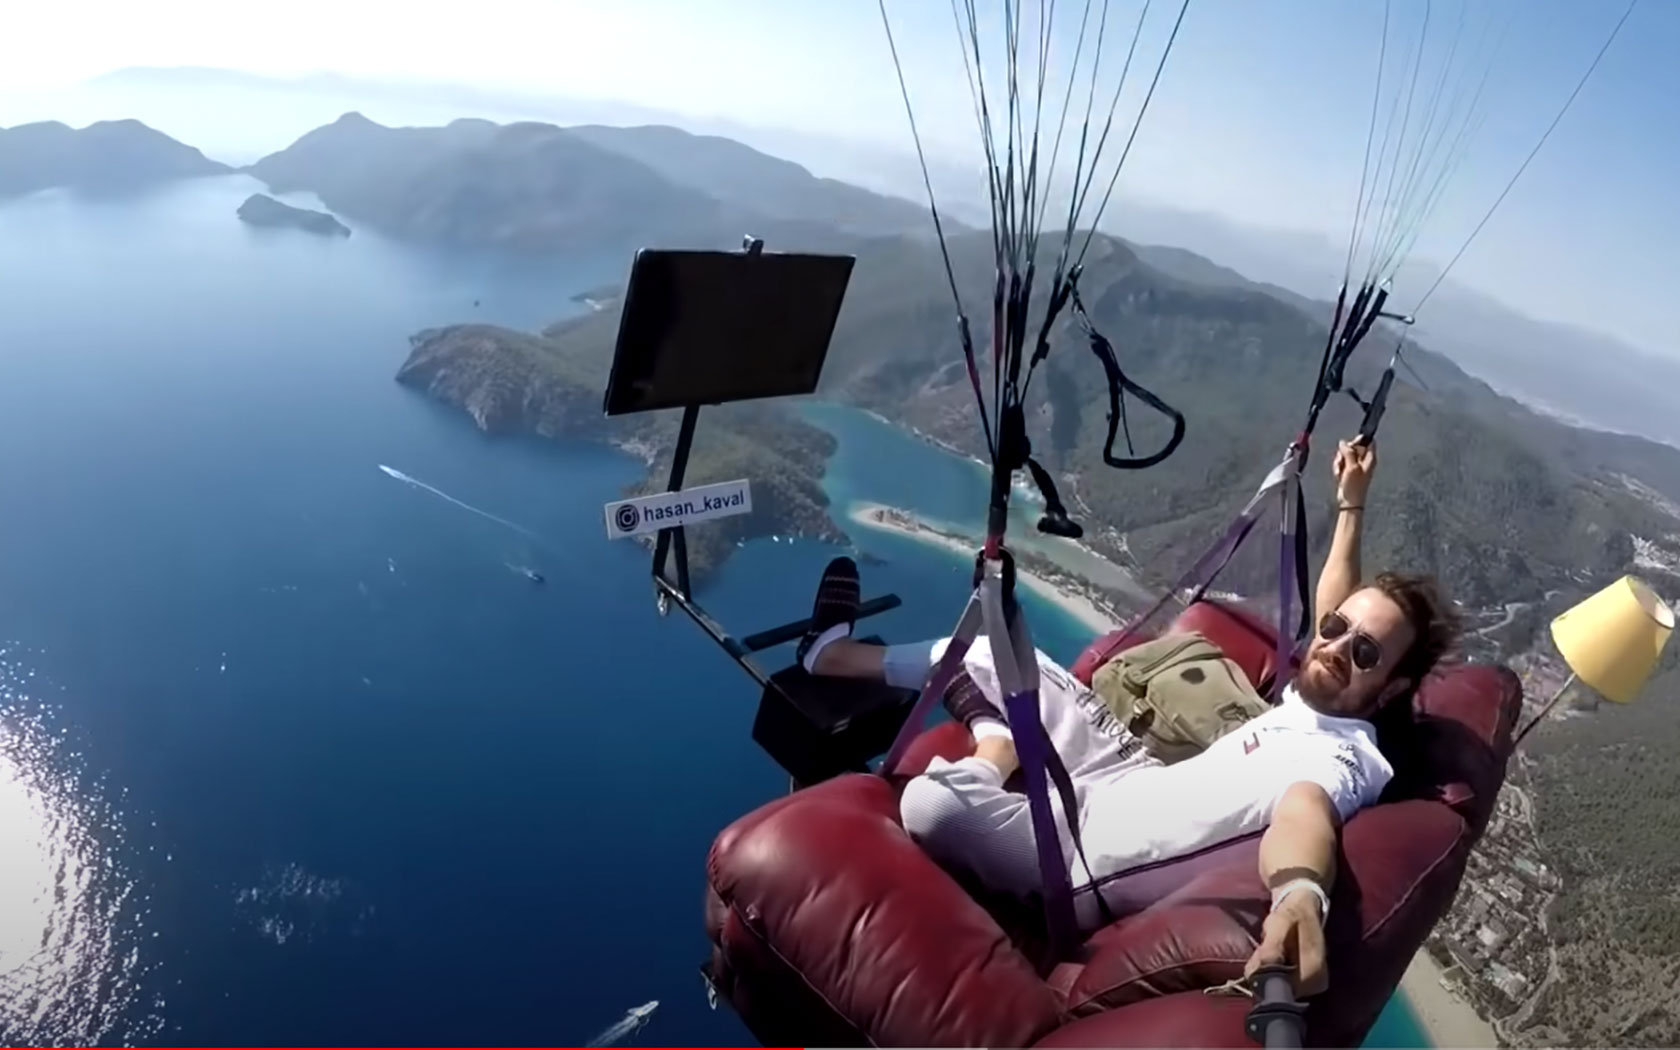 Hasan Kaval flew his paragliding couch over the ocean.